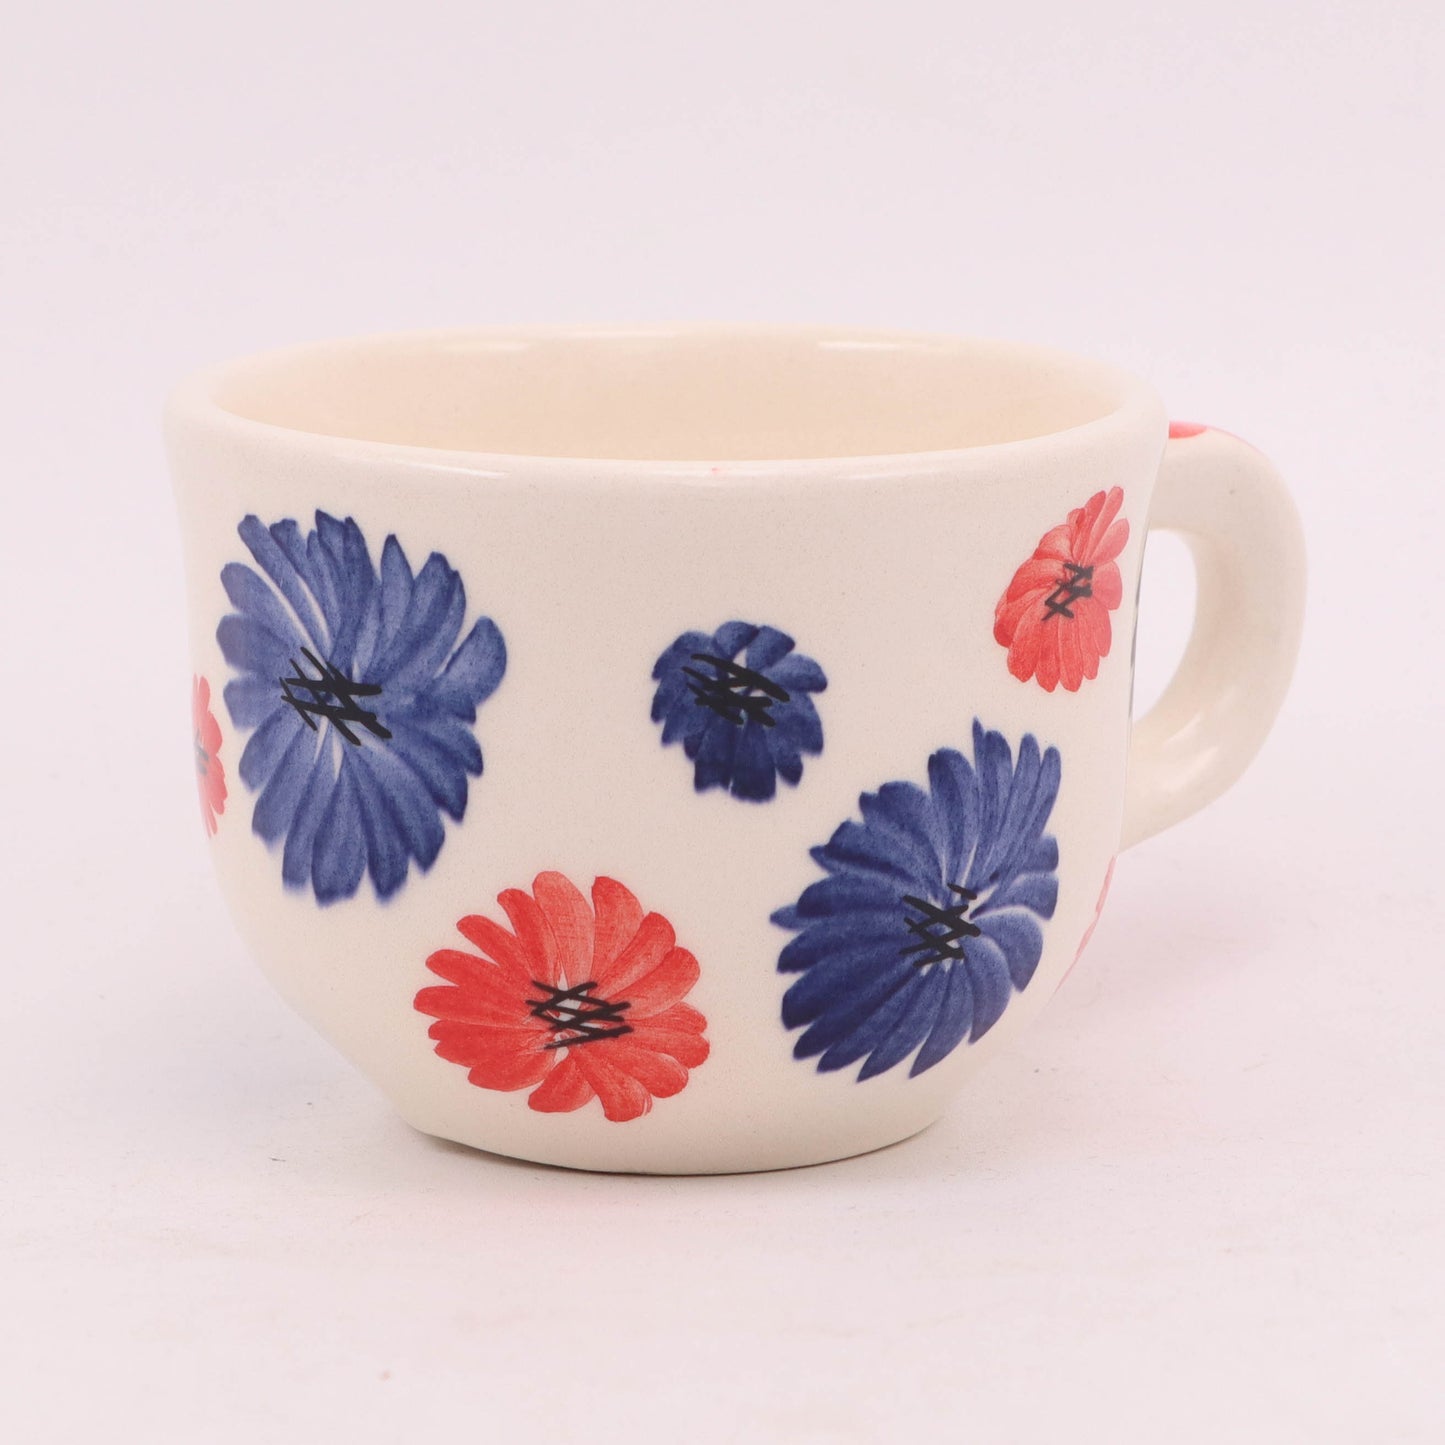 8oz Tea Cup. Pattern: Red and Blue